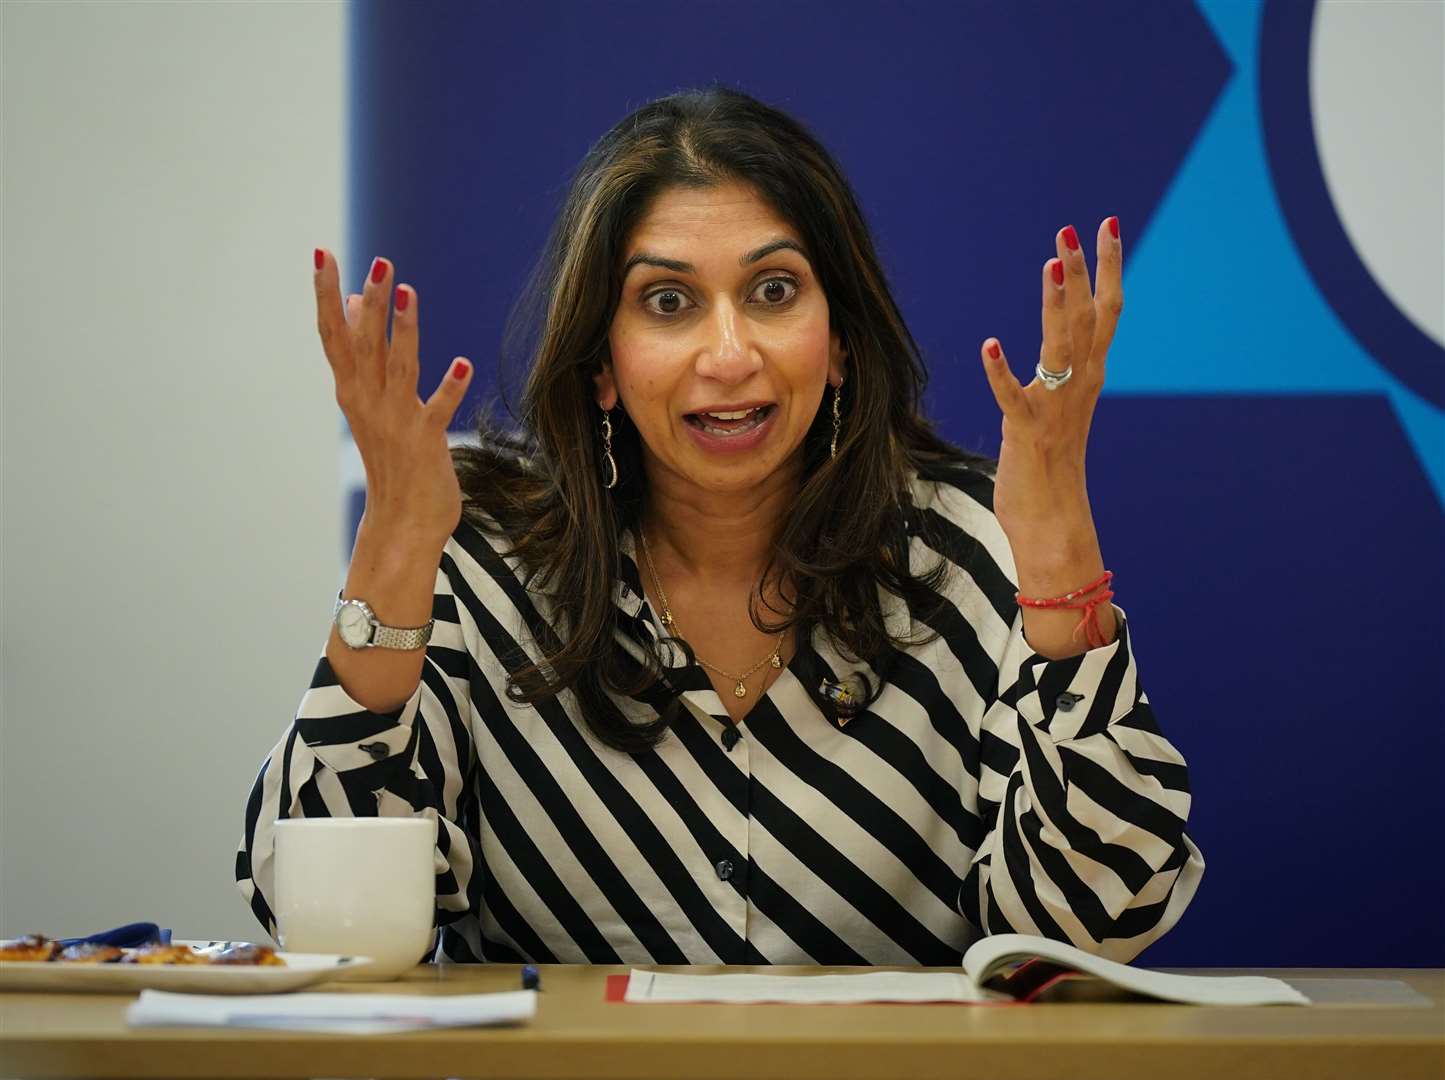 Suella Braverman welcomed the statement from the Metropolitan Police (Yui Mok/PA)